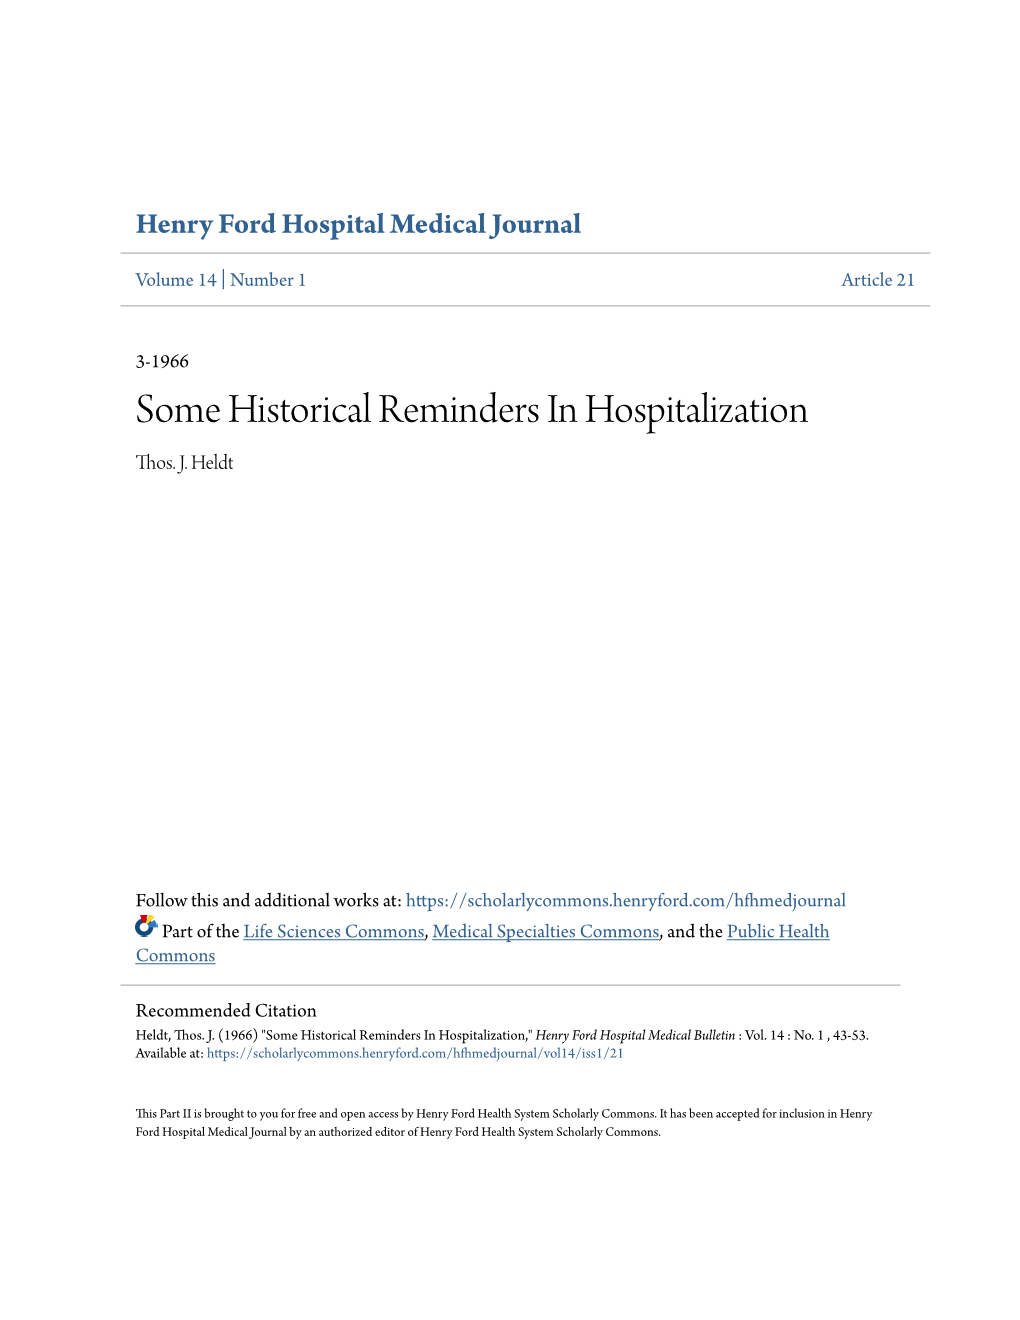 Some Historical Reminders in Hospitalization Thos